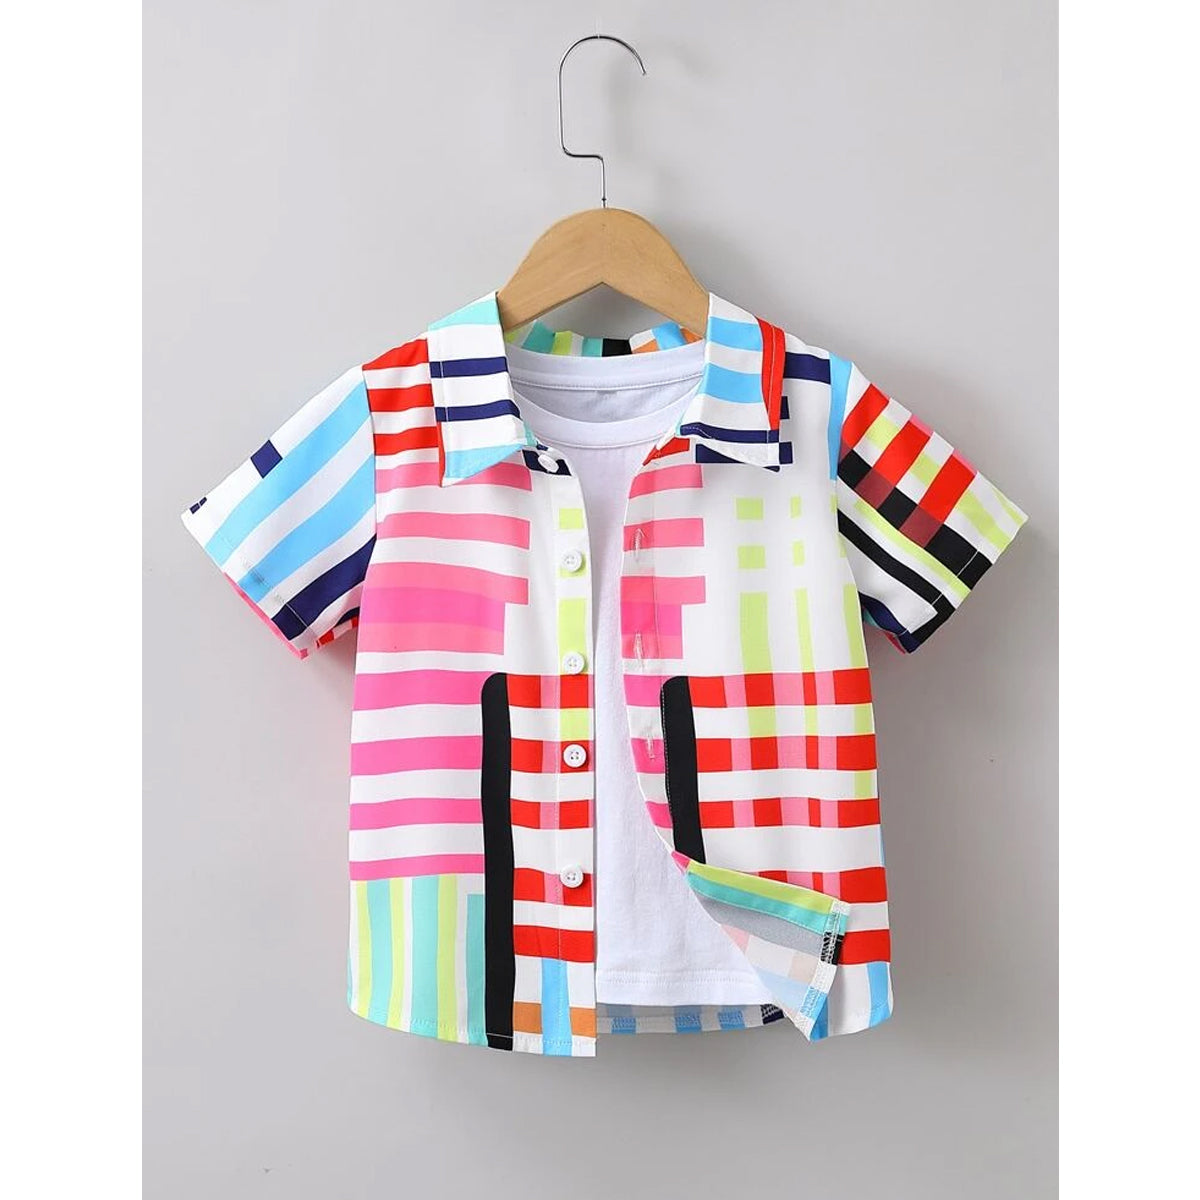 Venutaloza Boy's Worldwide & Letters and Plaid Patched Pocket Designer Button Front (Combo Pack Of 3) Shirt For Boy.